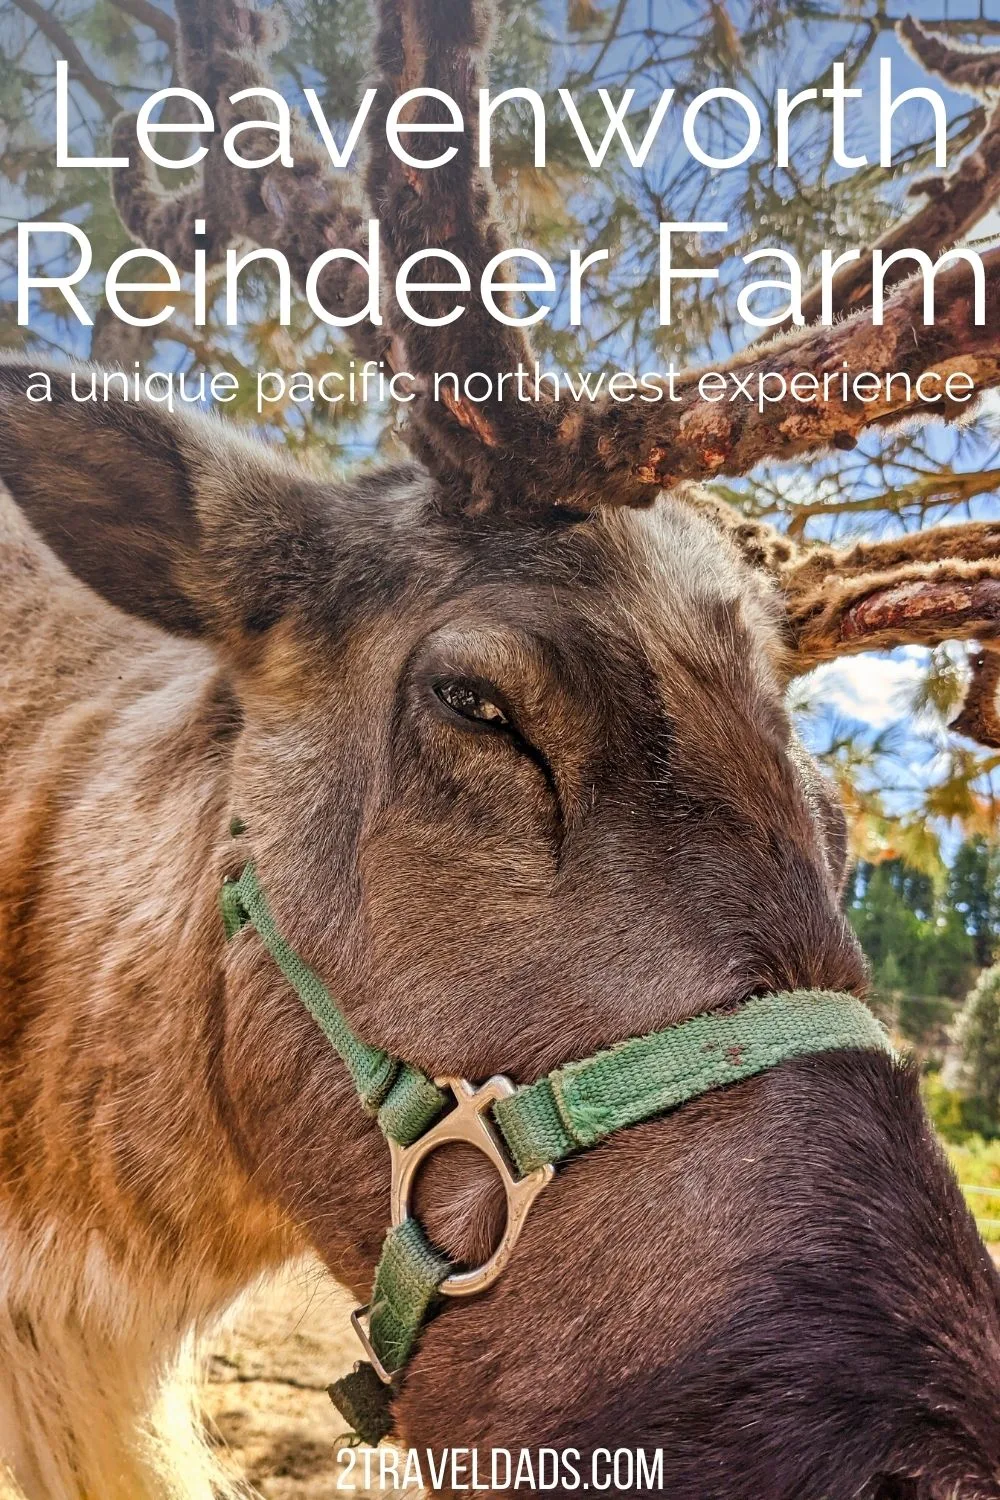 The Leavenworth Reindeer Farm is one of the best things to do when visiting Washington's Bavarian village. See what to expect and things to do and then plan a visit to this unique Pacific Northwest farm.